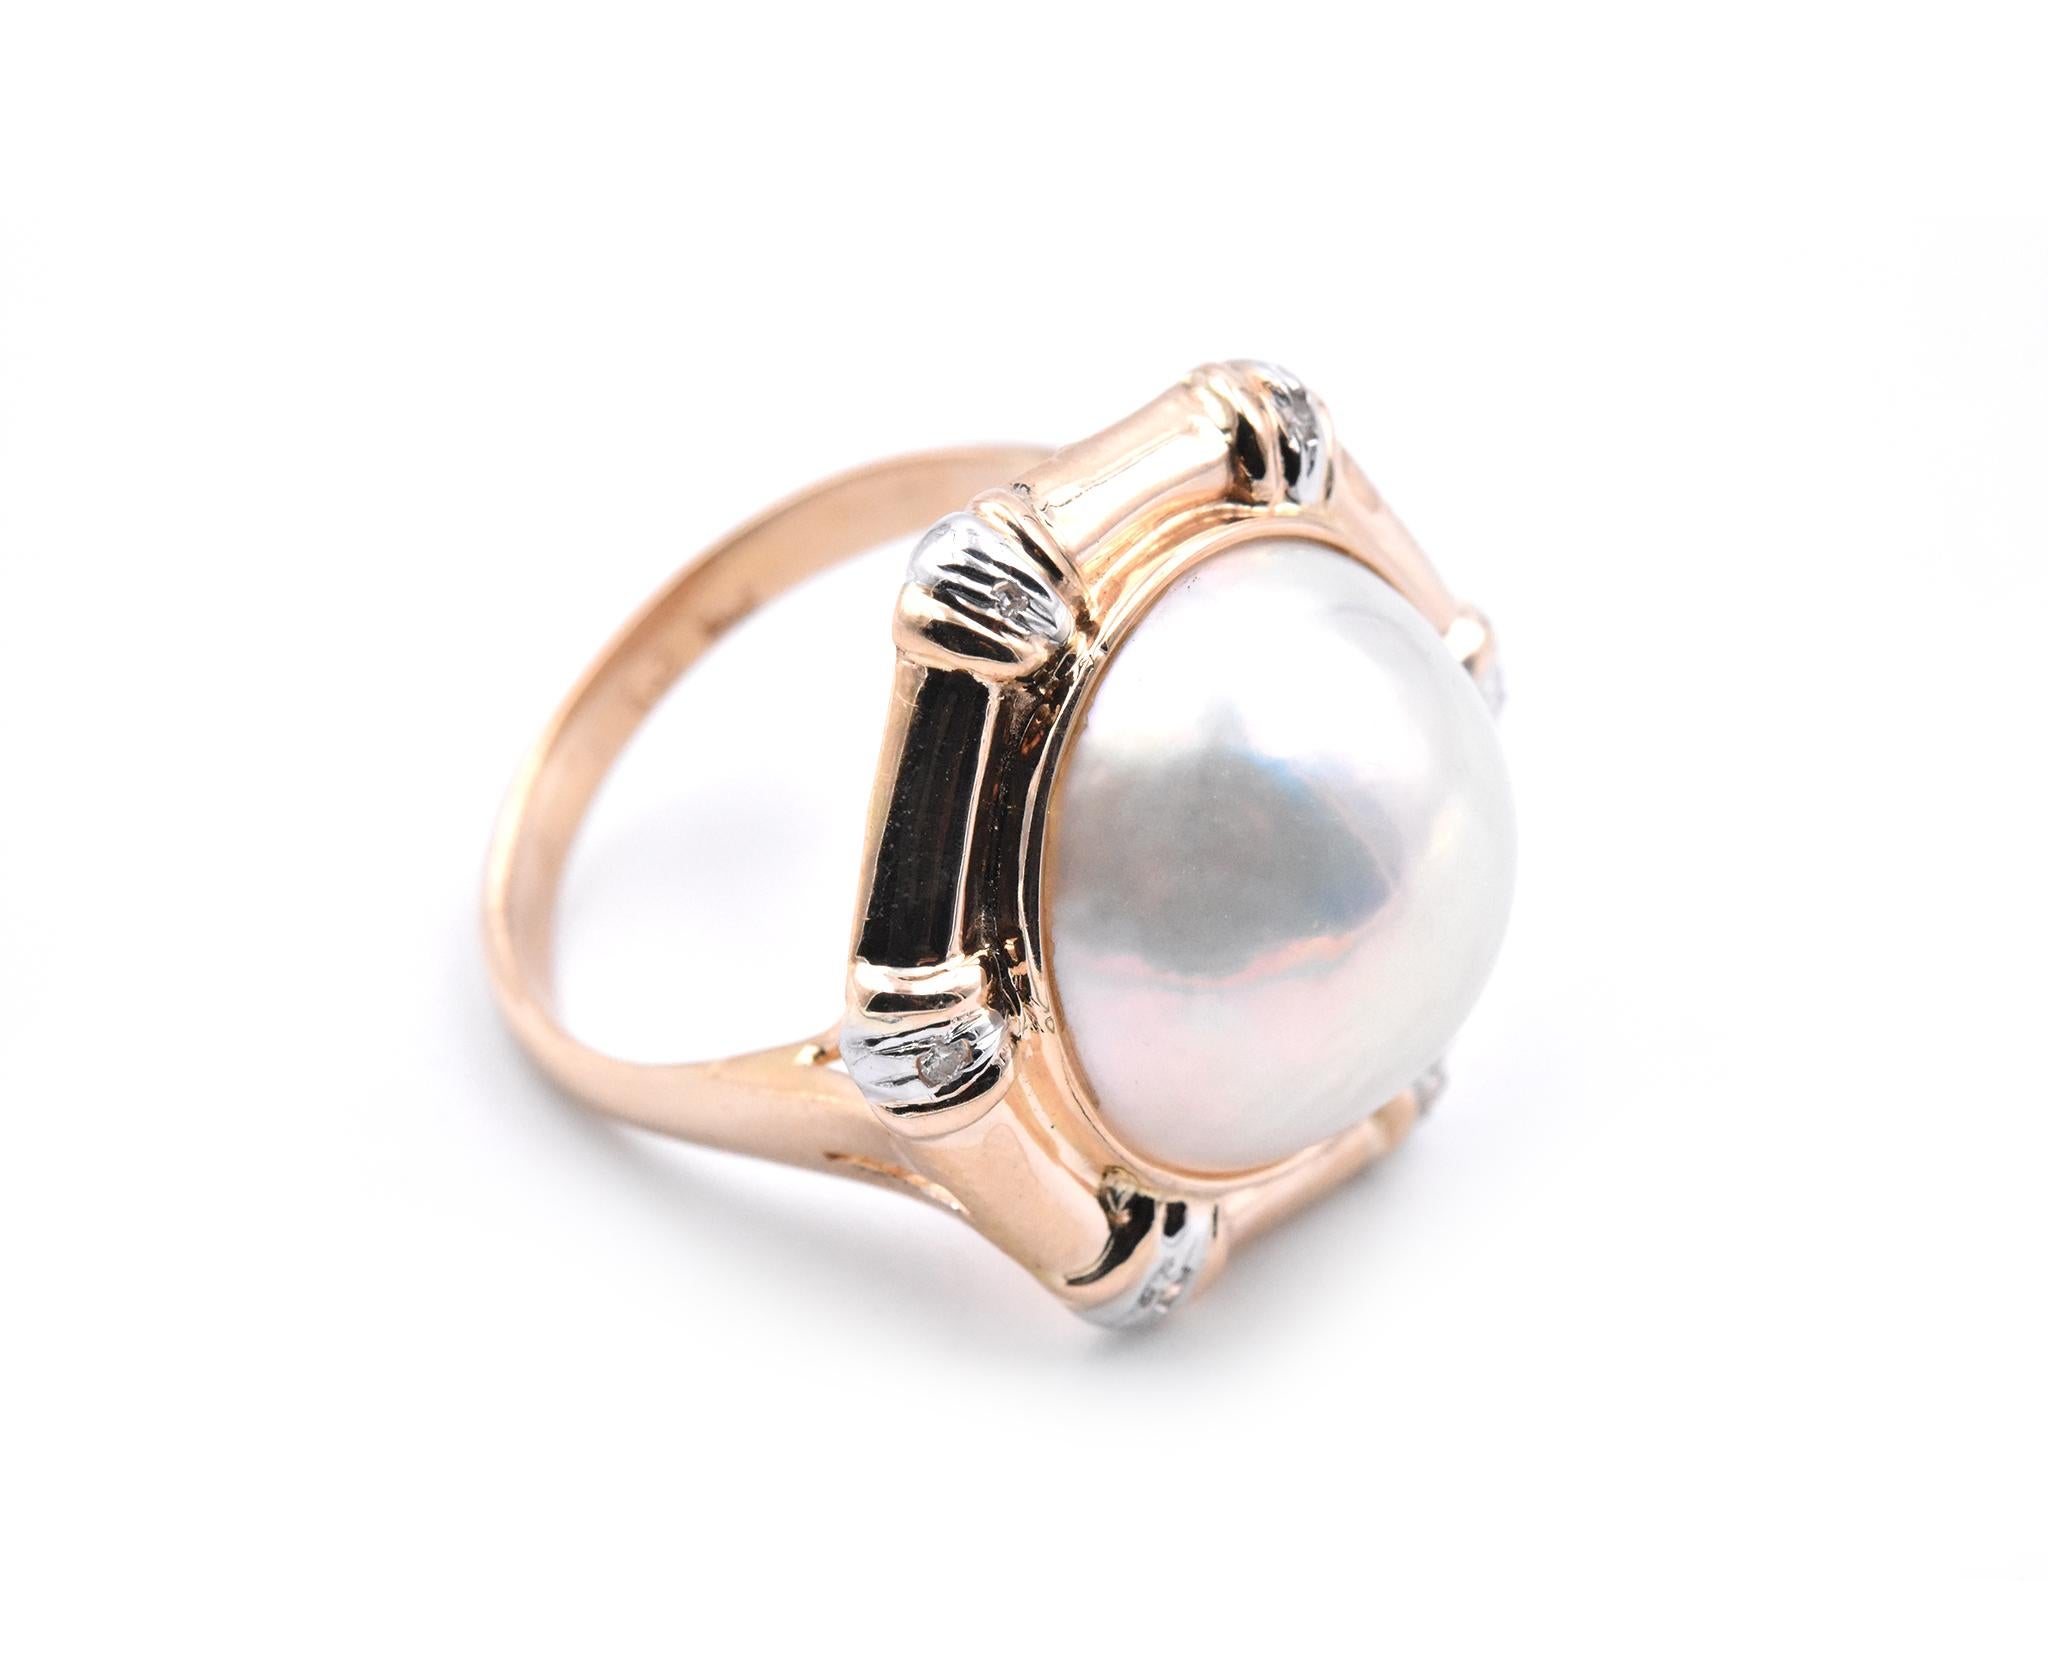 Material: 14k yellow gold
Pearl: 1 mabe = 14.50mm
Diamonds: 6 round brilliant cut = .03cttw 
Color: H
Clarity: SI1
Ring Size: 7.75 (please allow two additional shipping days for sizing requests)
Dimensions: ring measures 20.63 X 22.95mm
Weight: 